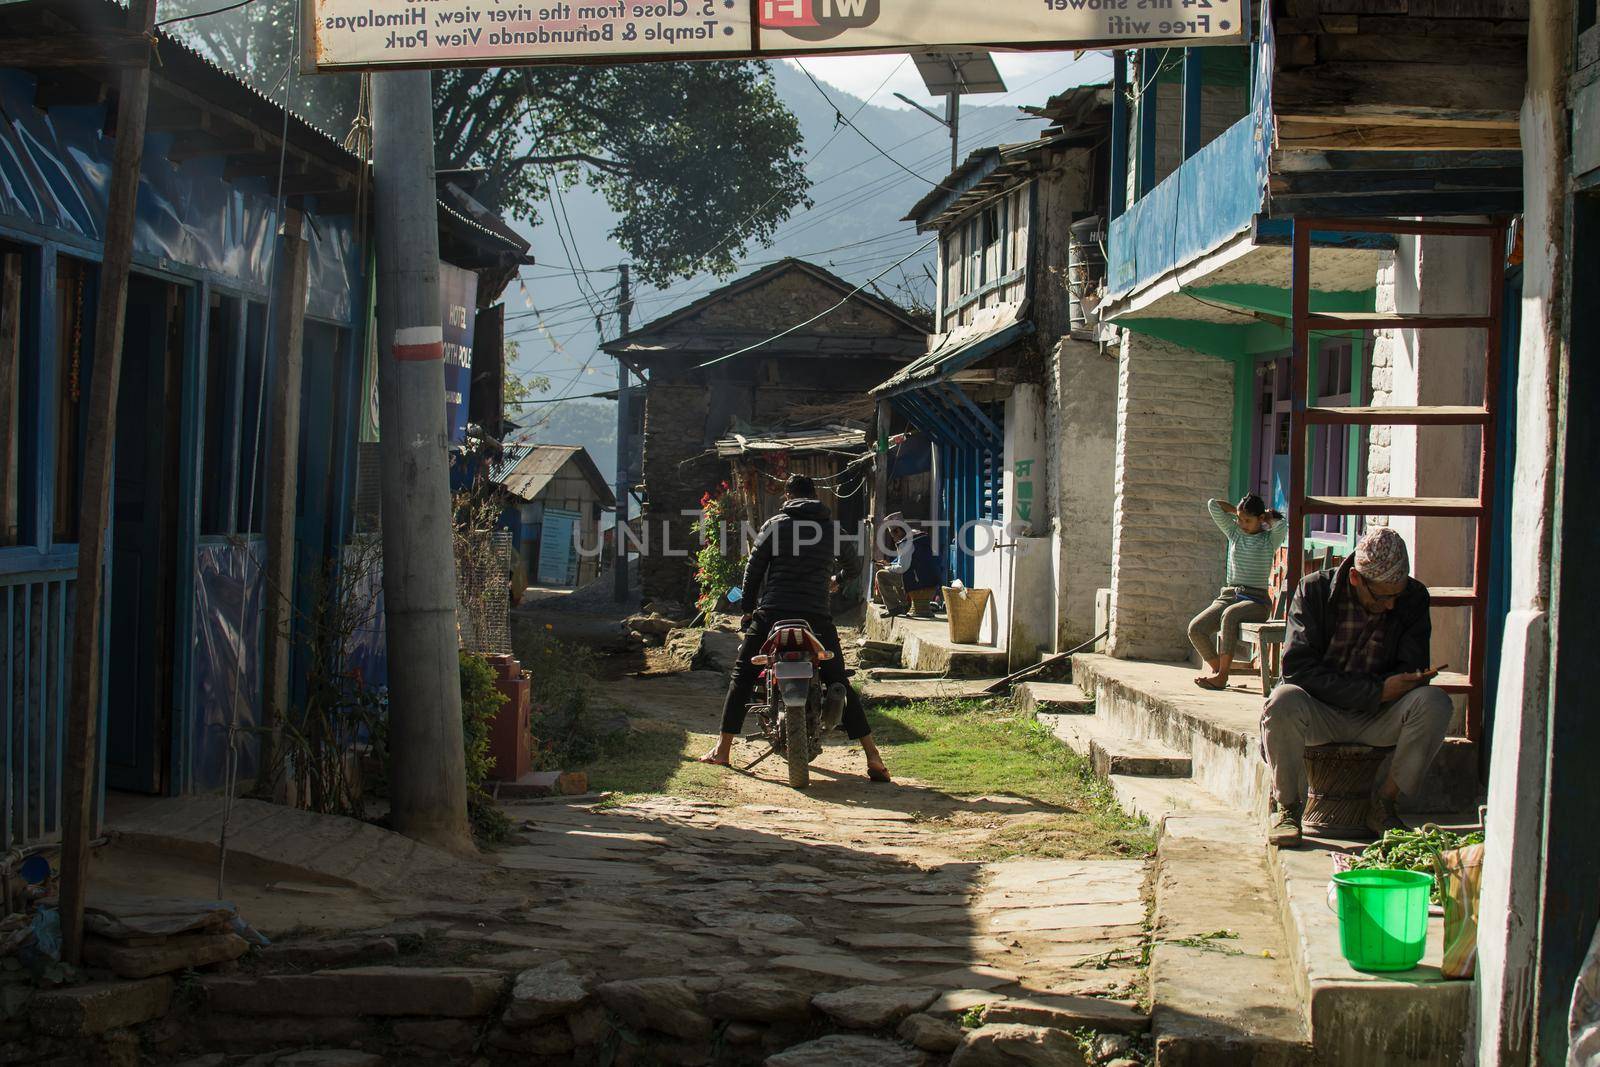 Traditional nepalese mountain village with a man on a motorcycle at Bahundanda, Annapurna circuit